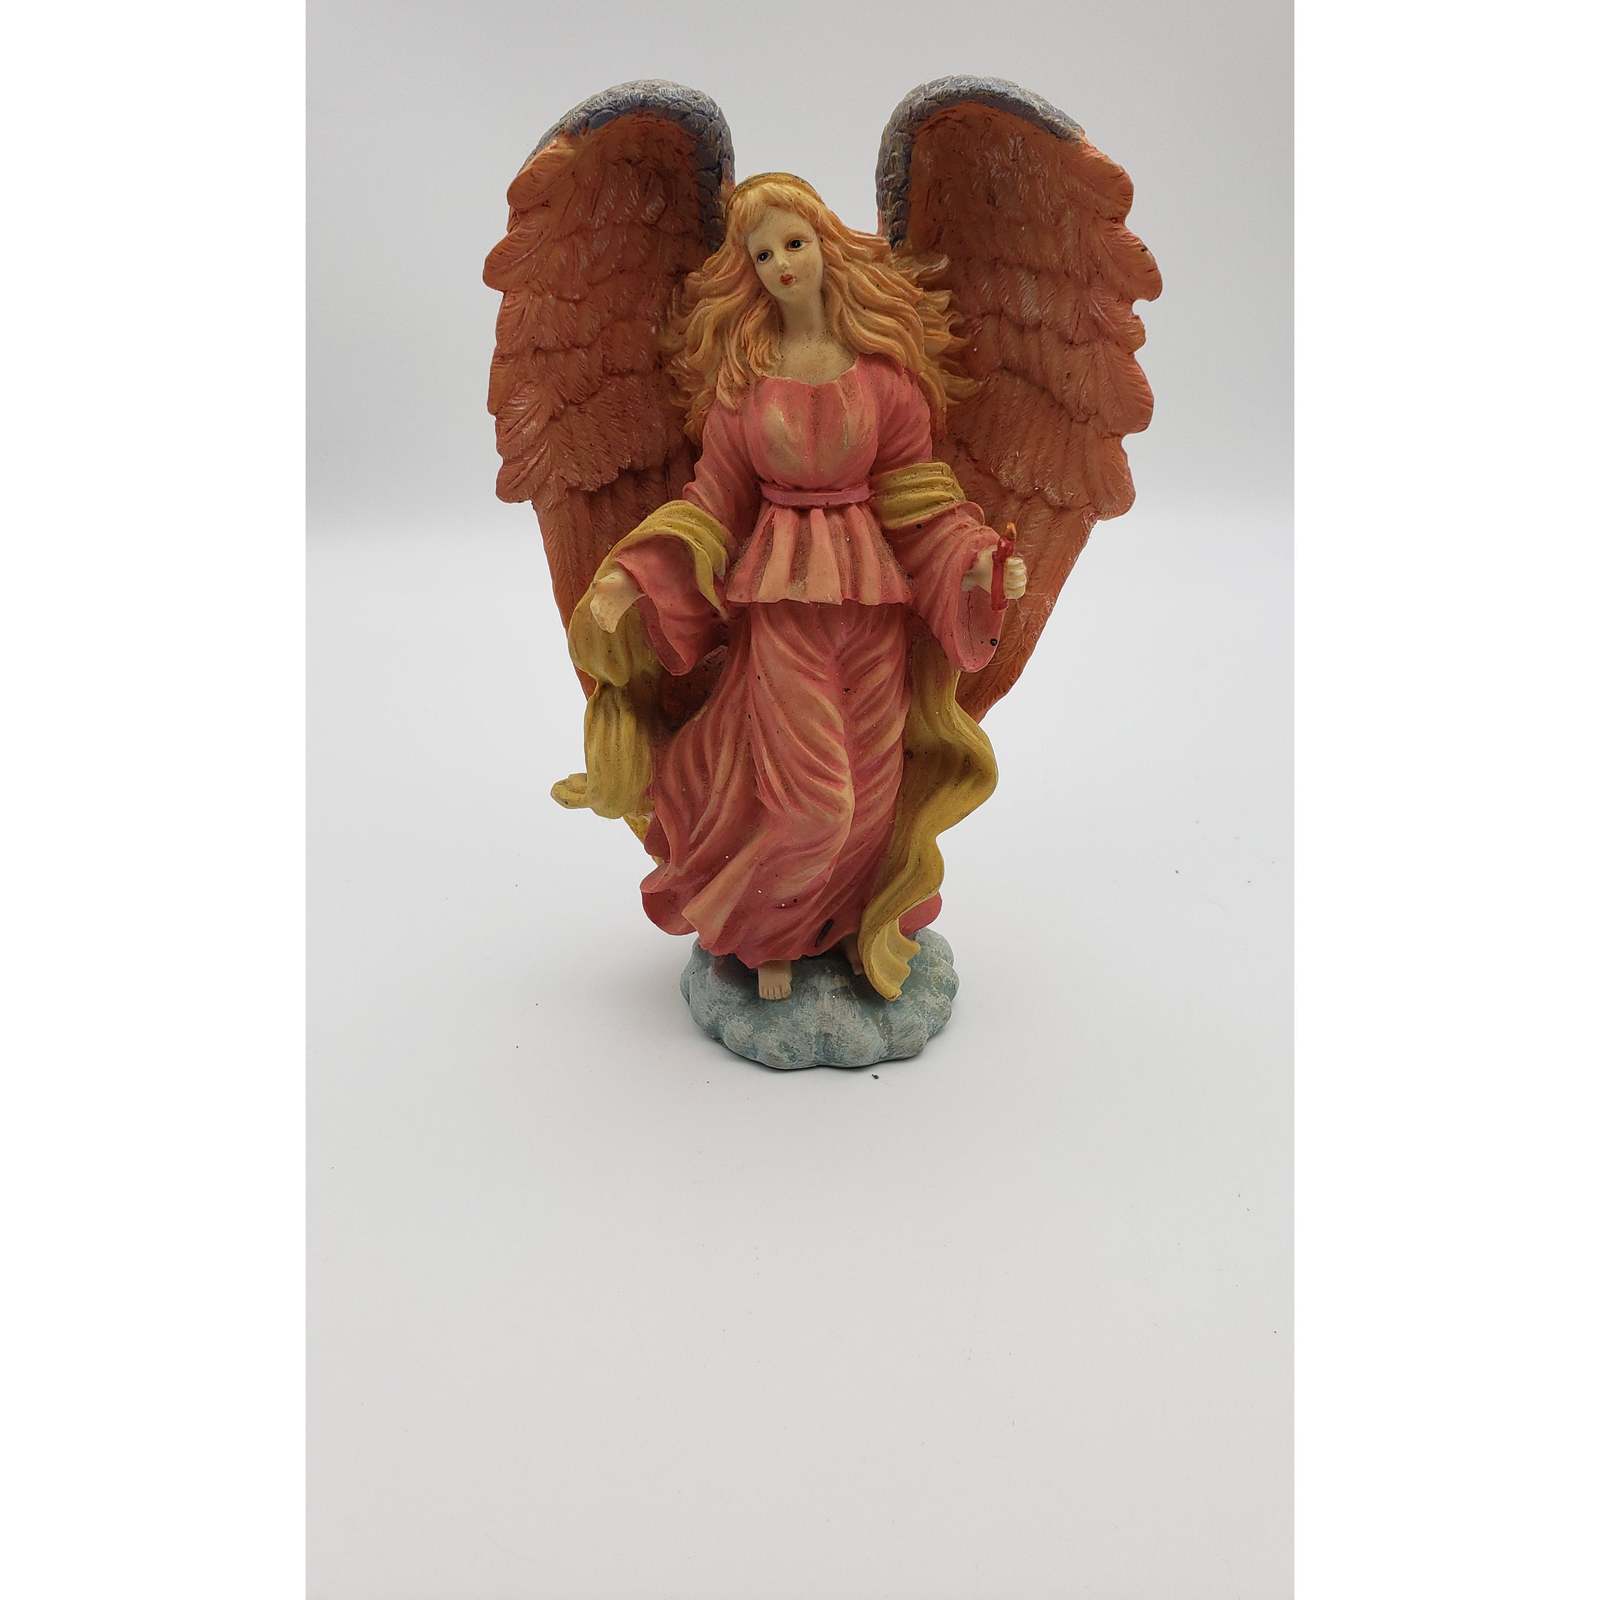 9in Resin Angel with Candle Figurine - $15.00